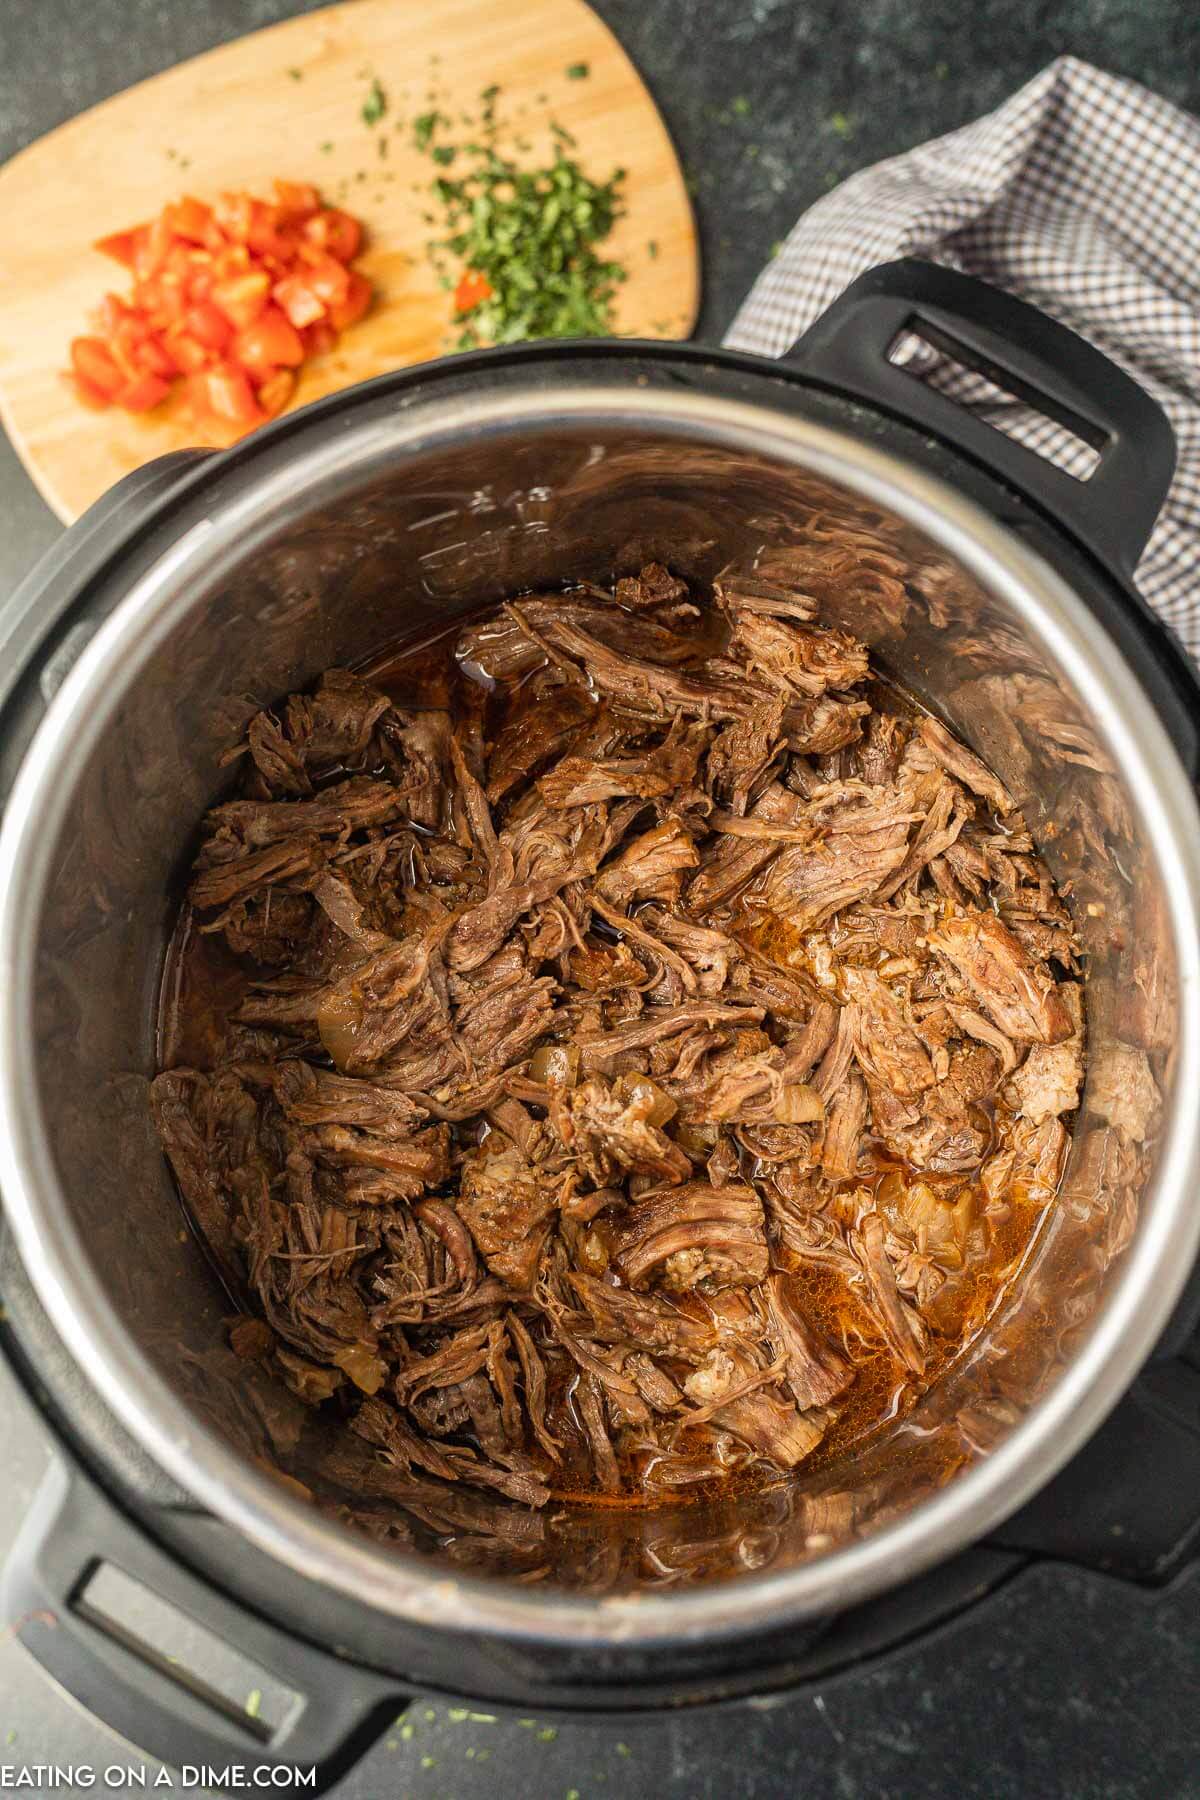 Shredded beef in the intant pot